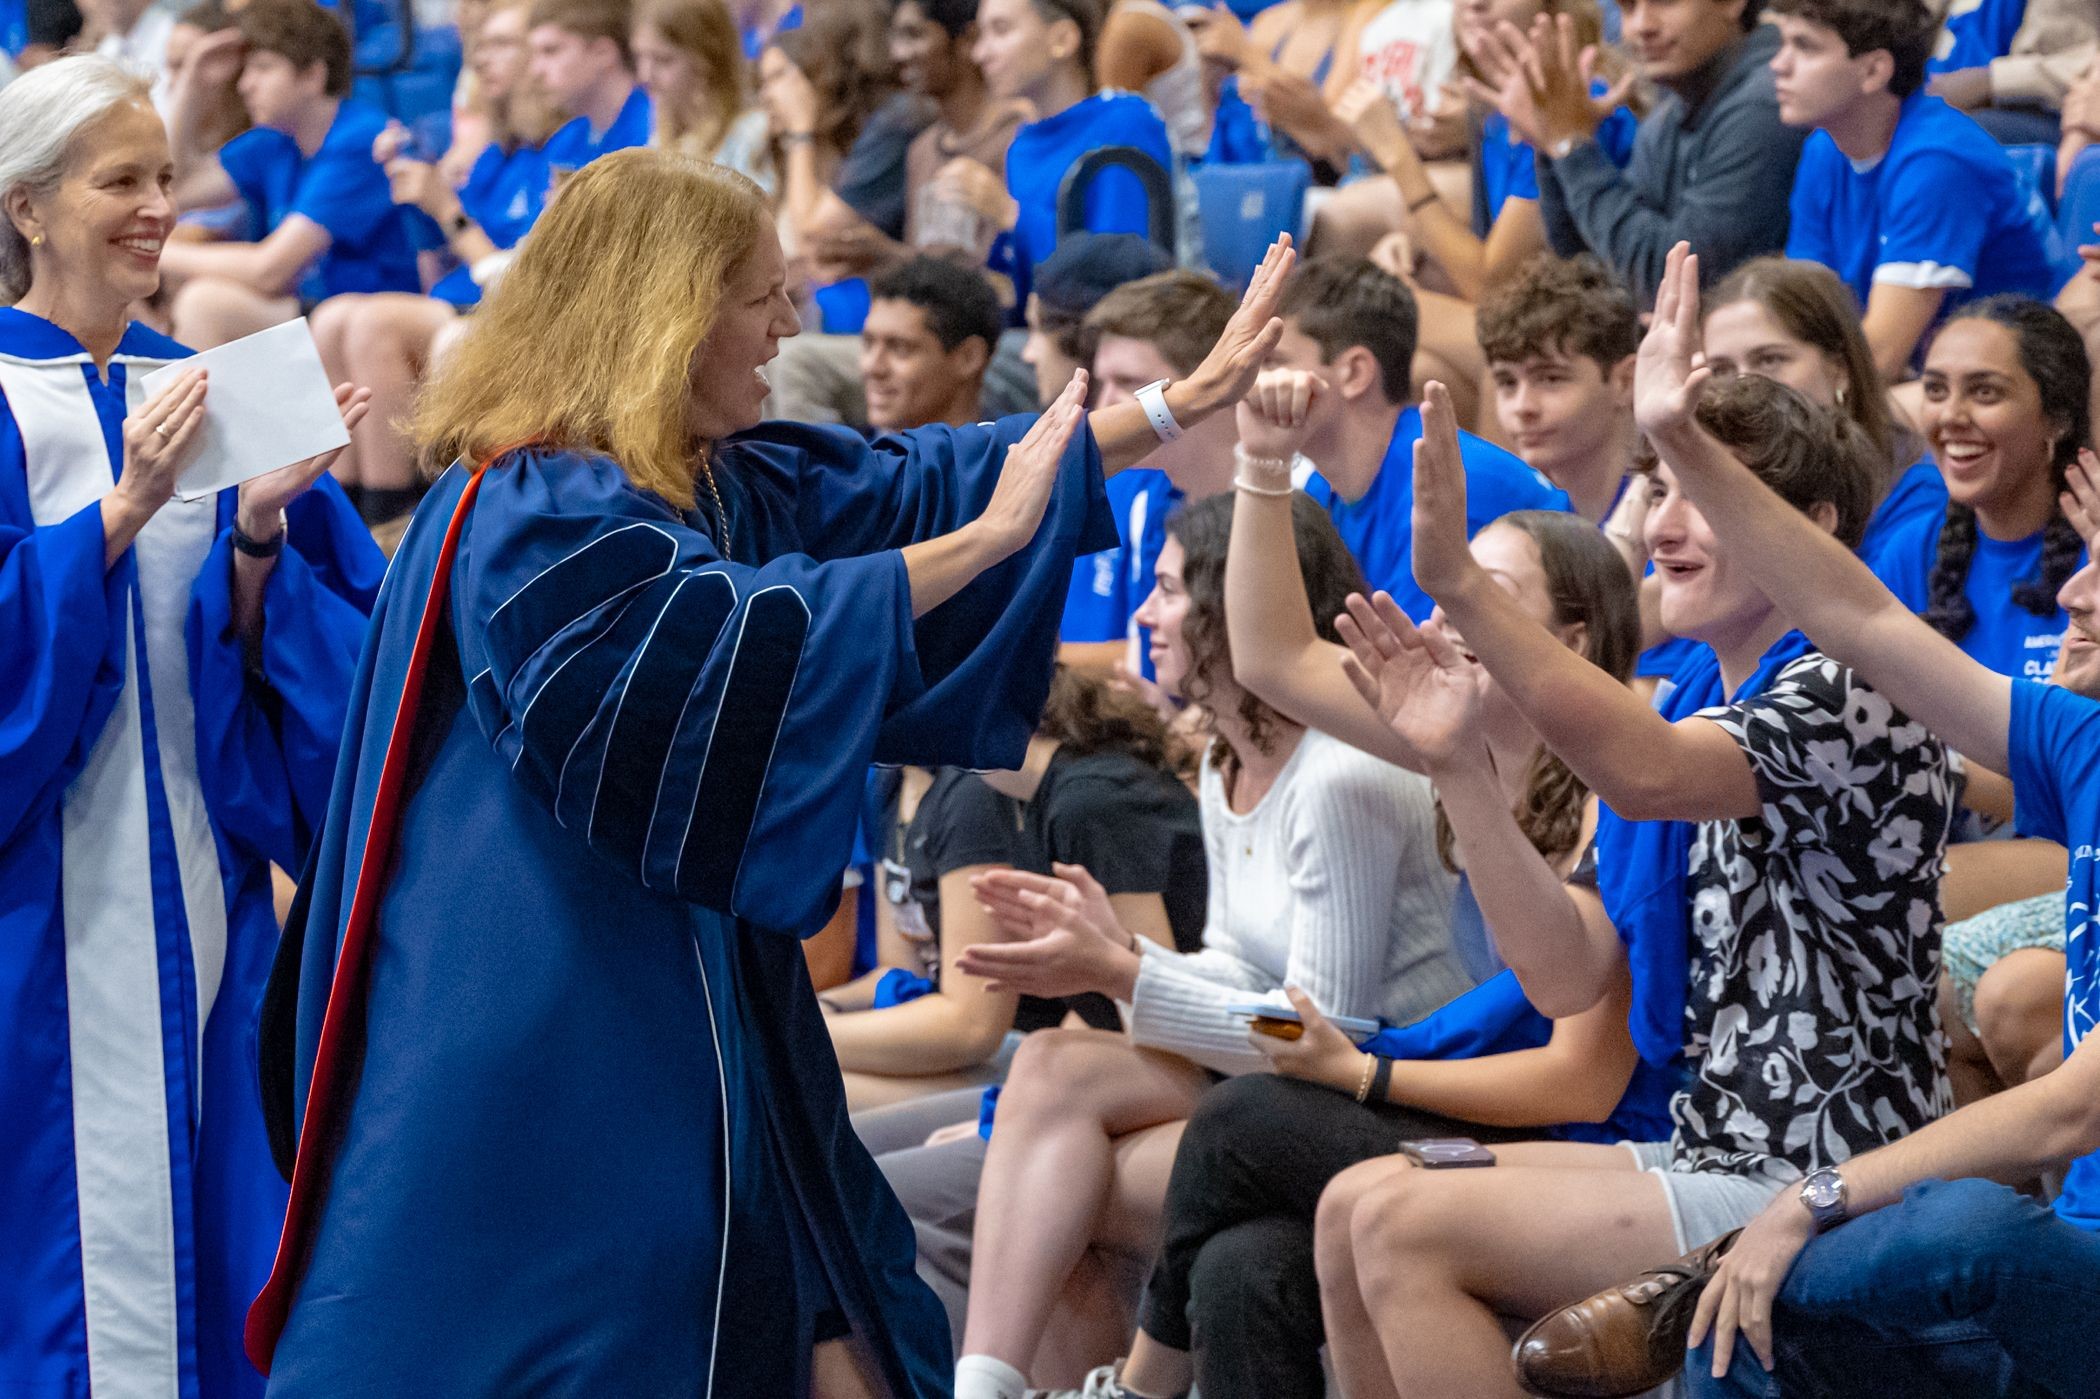 President Sylvia M Burwell high-fiving students at Convocation